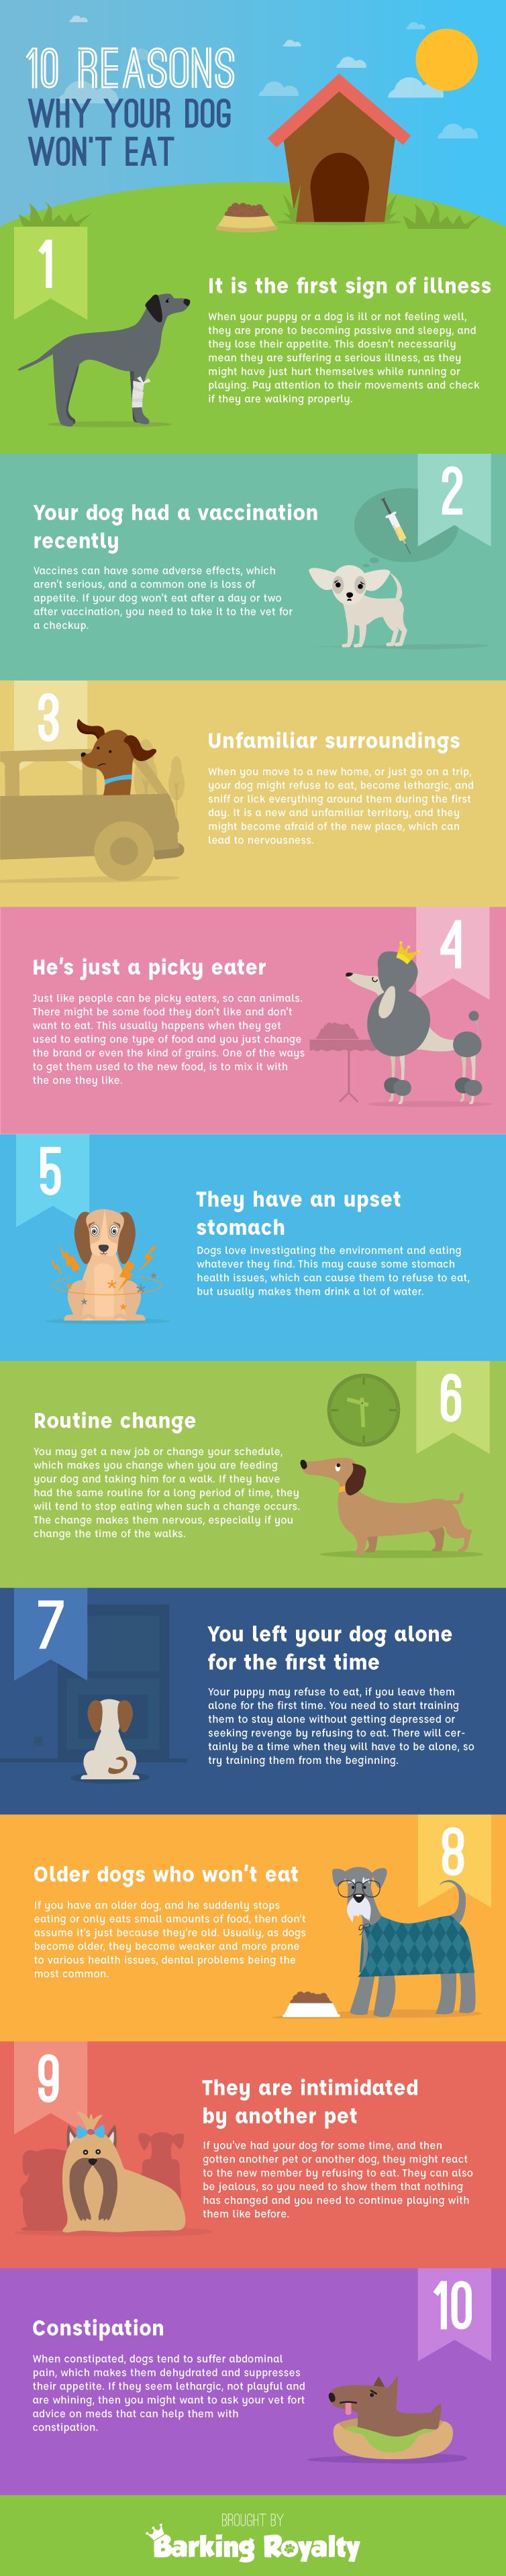 Infographic of 10 reasons dog wont eat